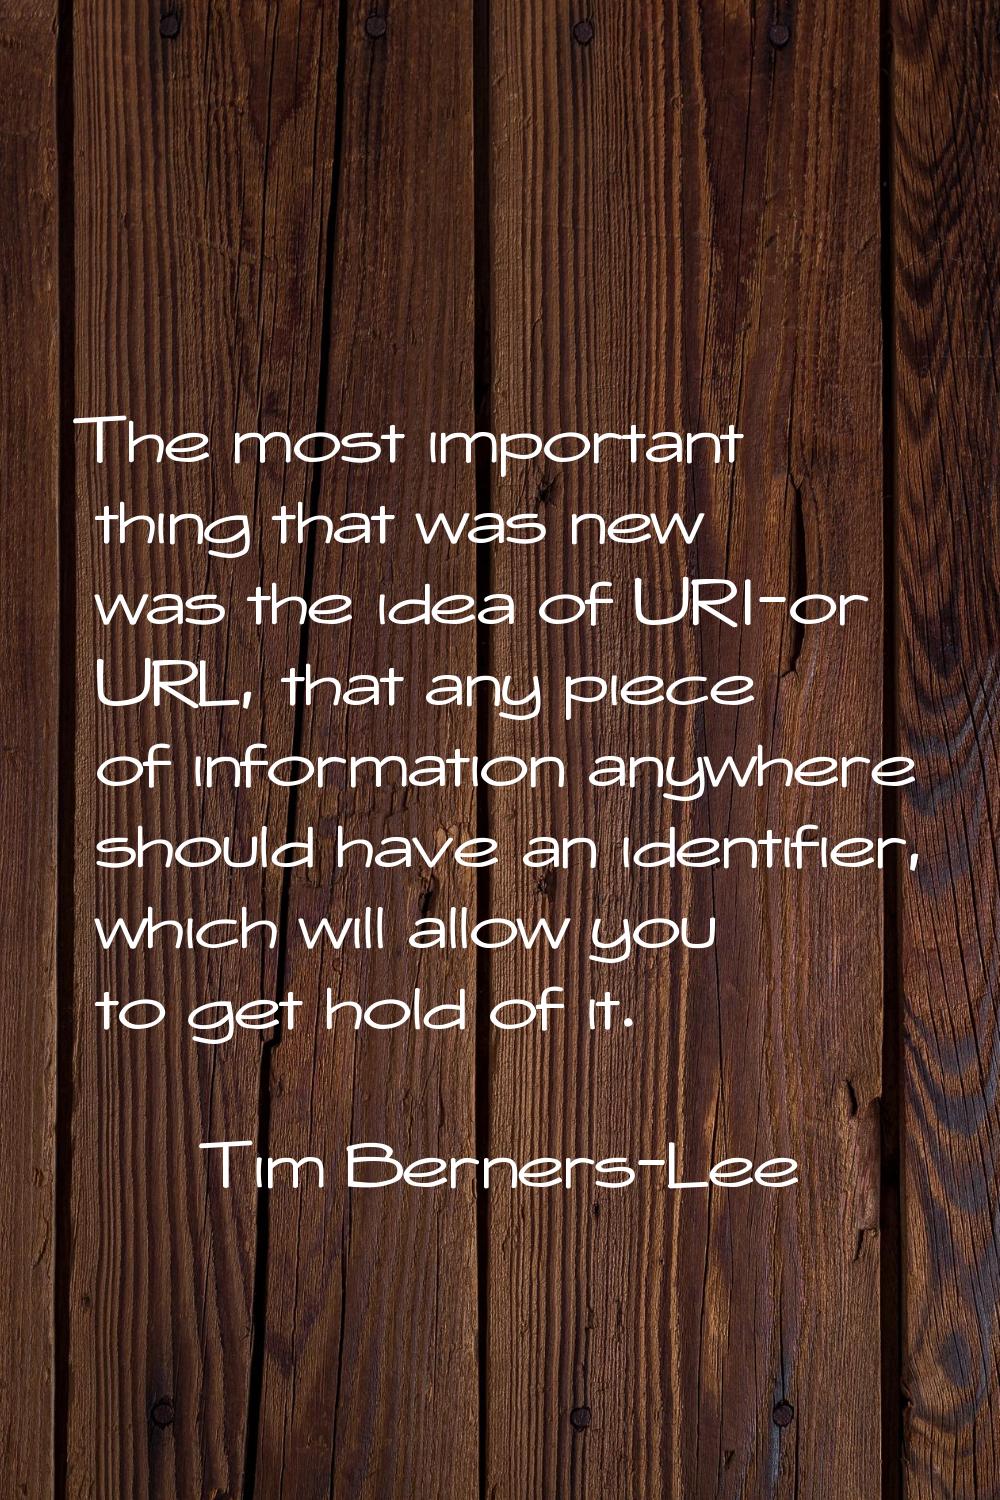 The most important thing that was new was the idea of URI-or URL, that any piece of information any